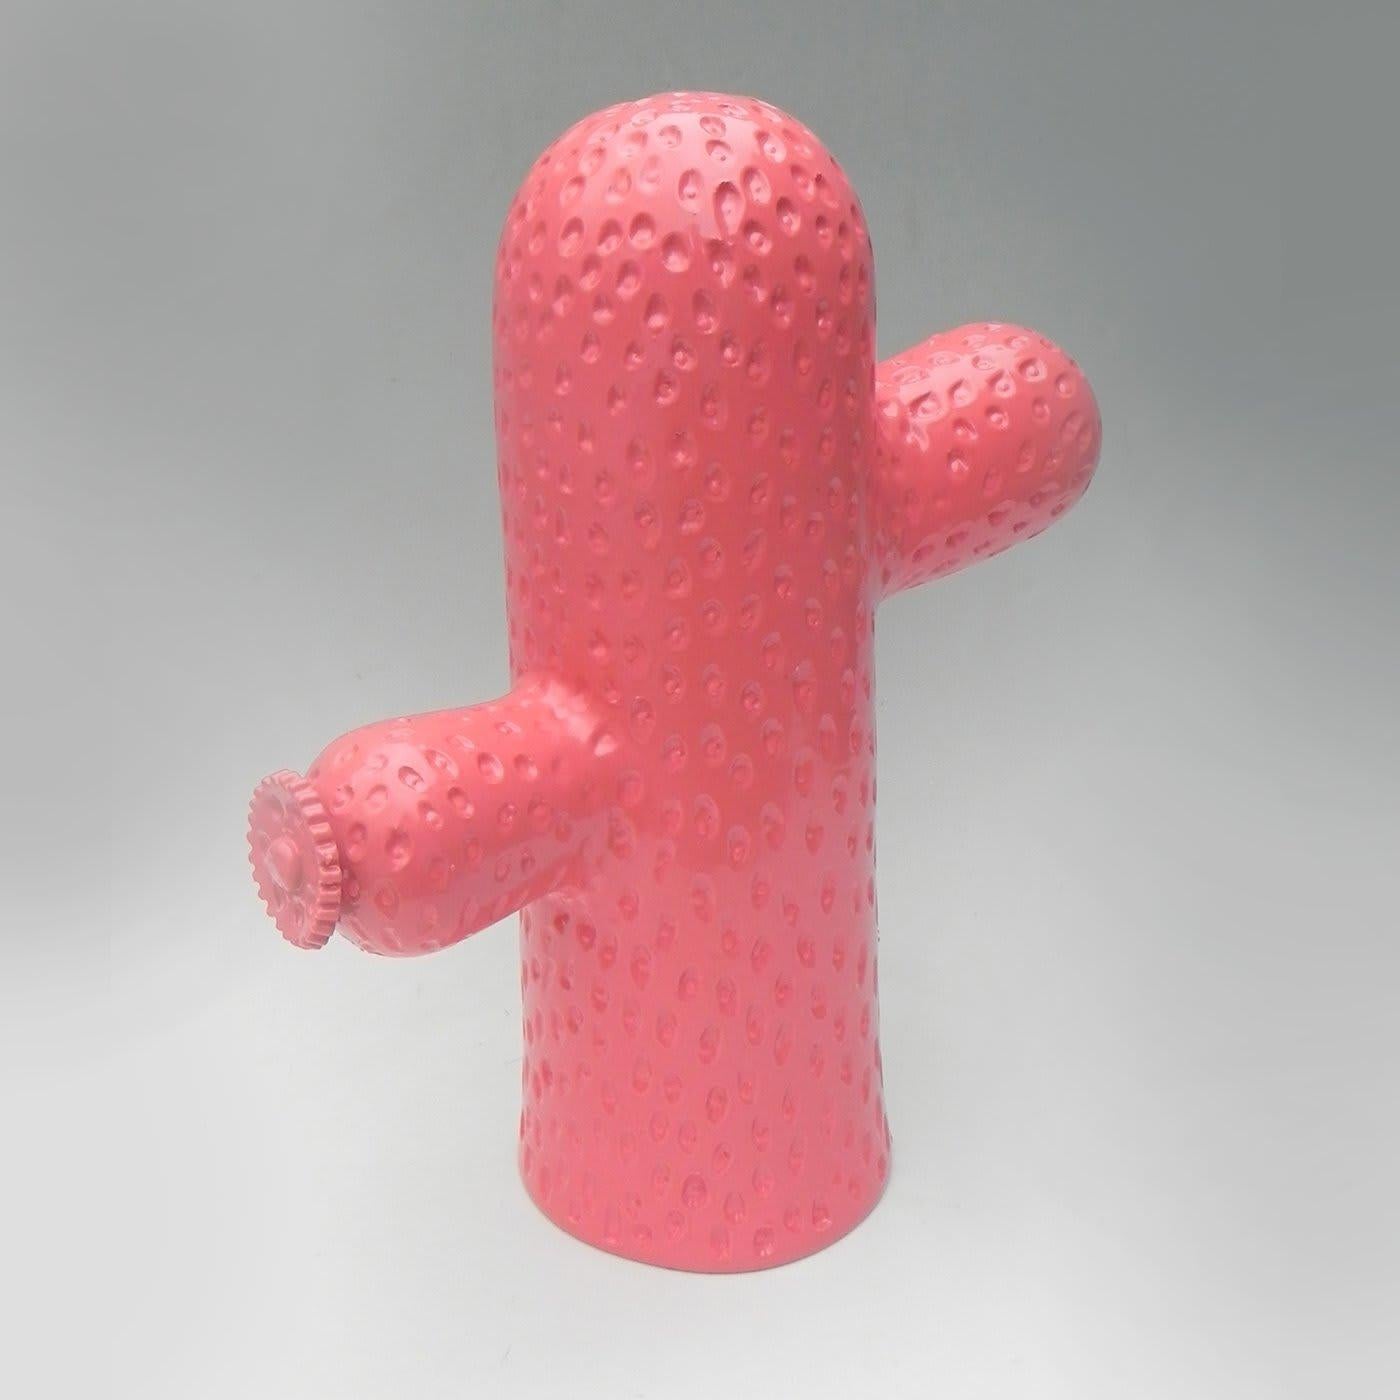 Contemporary Two-Arm Cactus Sculpture By Mazzotti 1903 For Sale